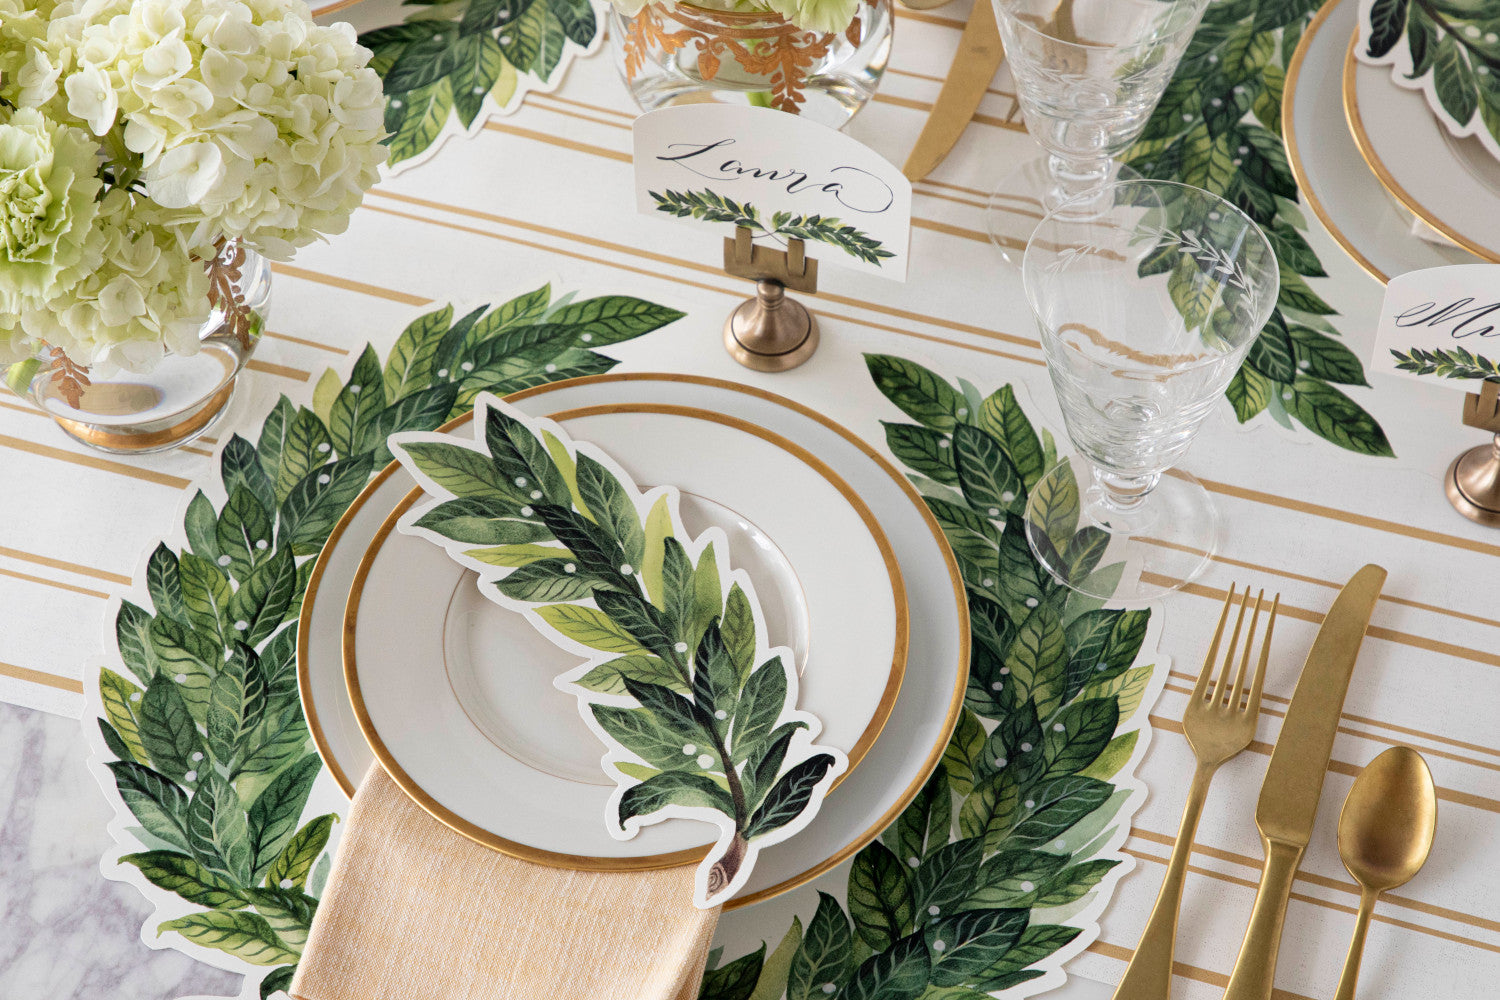 The Die-cut Green Laurel Wreath Placemat under an elegant table setting.